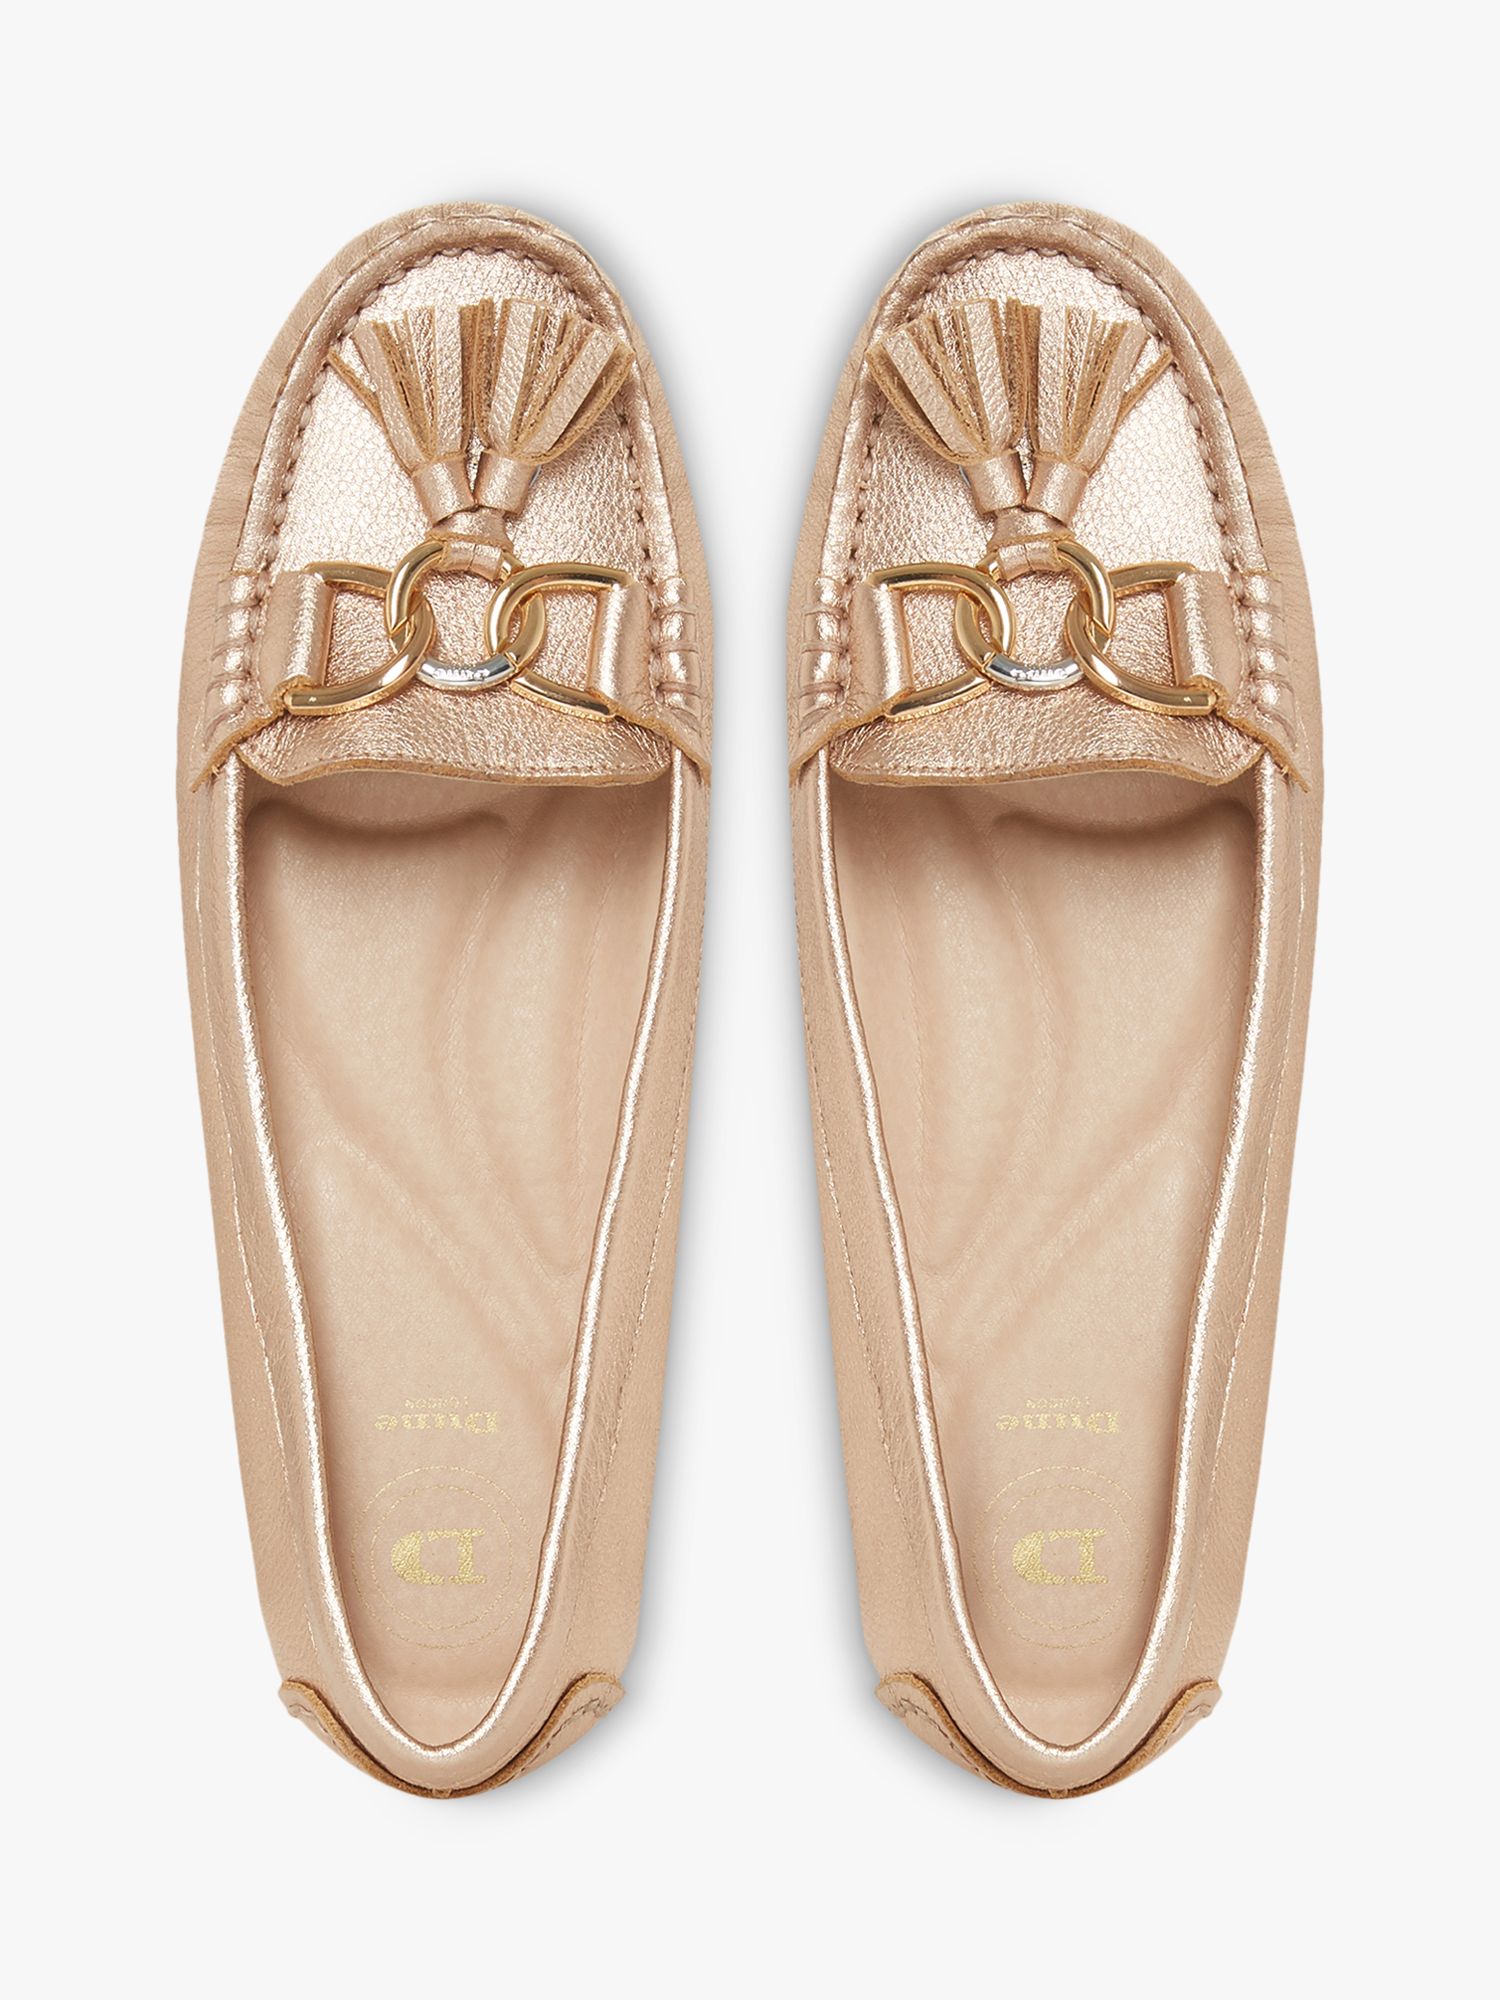 Dune Geena Tassel Moccasin Leather Loafers at John Lewis & Partners